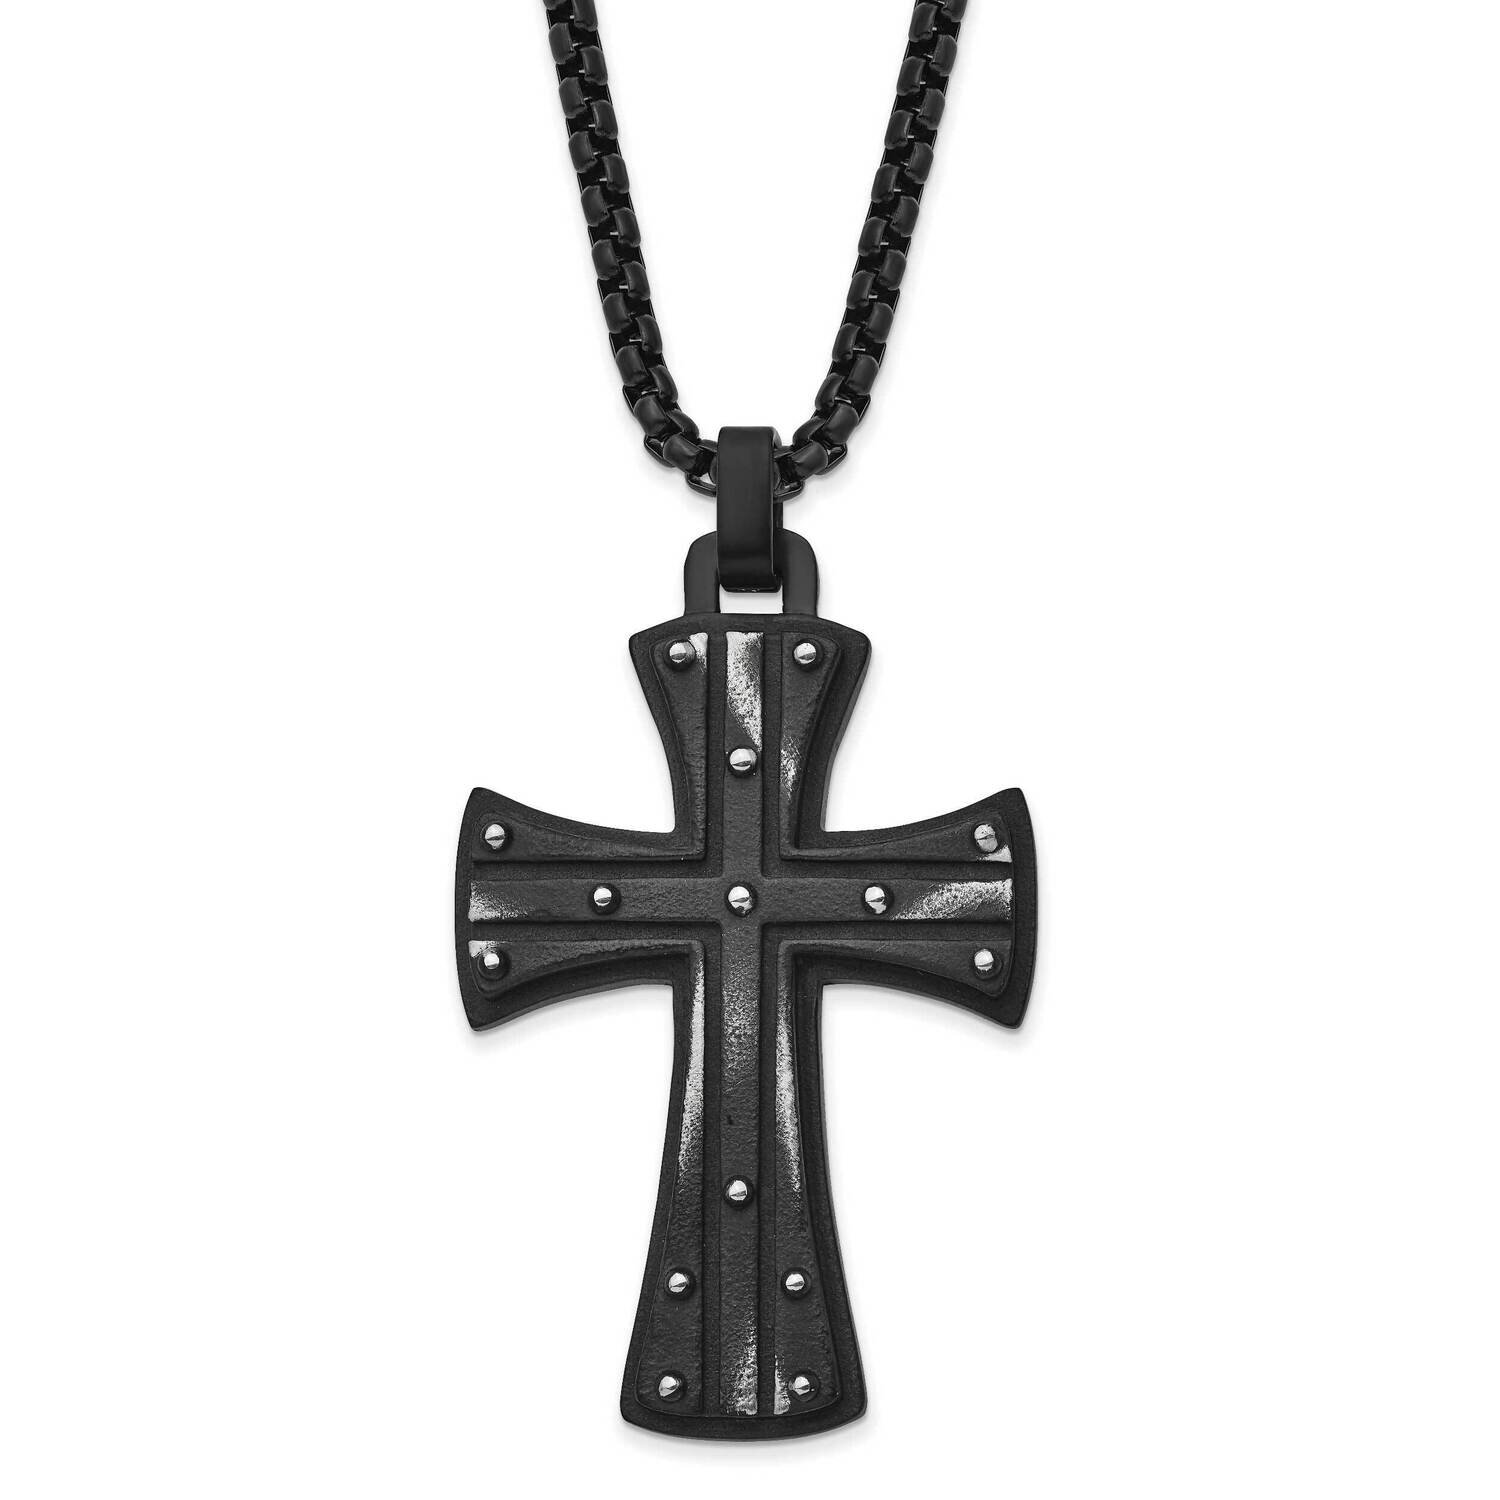 Antiqued and Brushed Black Ip-Plated Cross 24 Inch Necklace Stainless Steel SRN2986-24